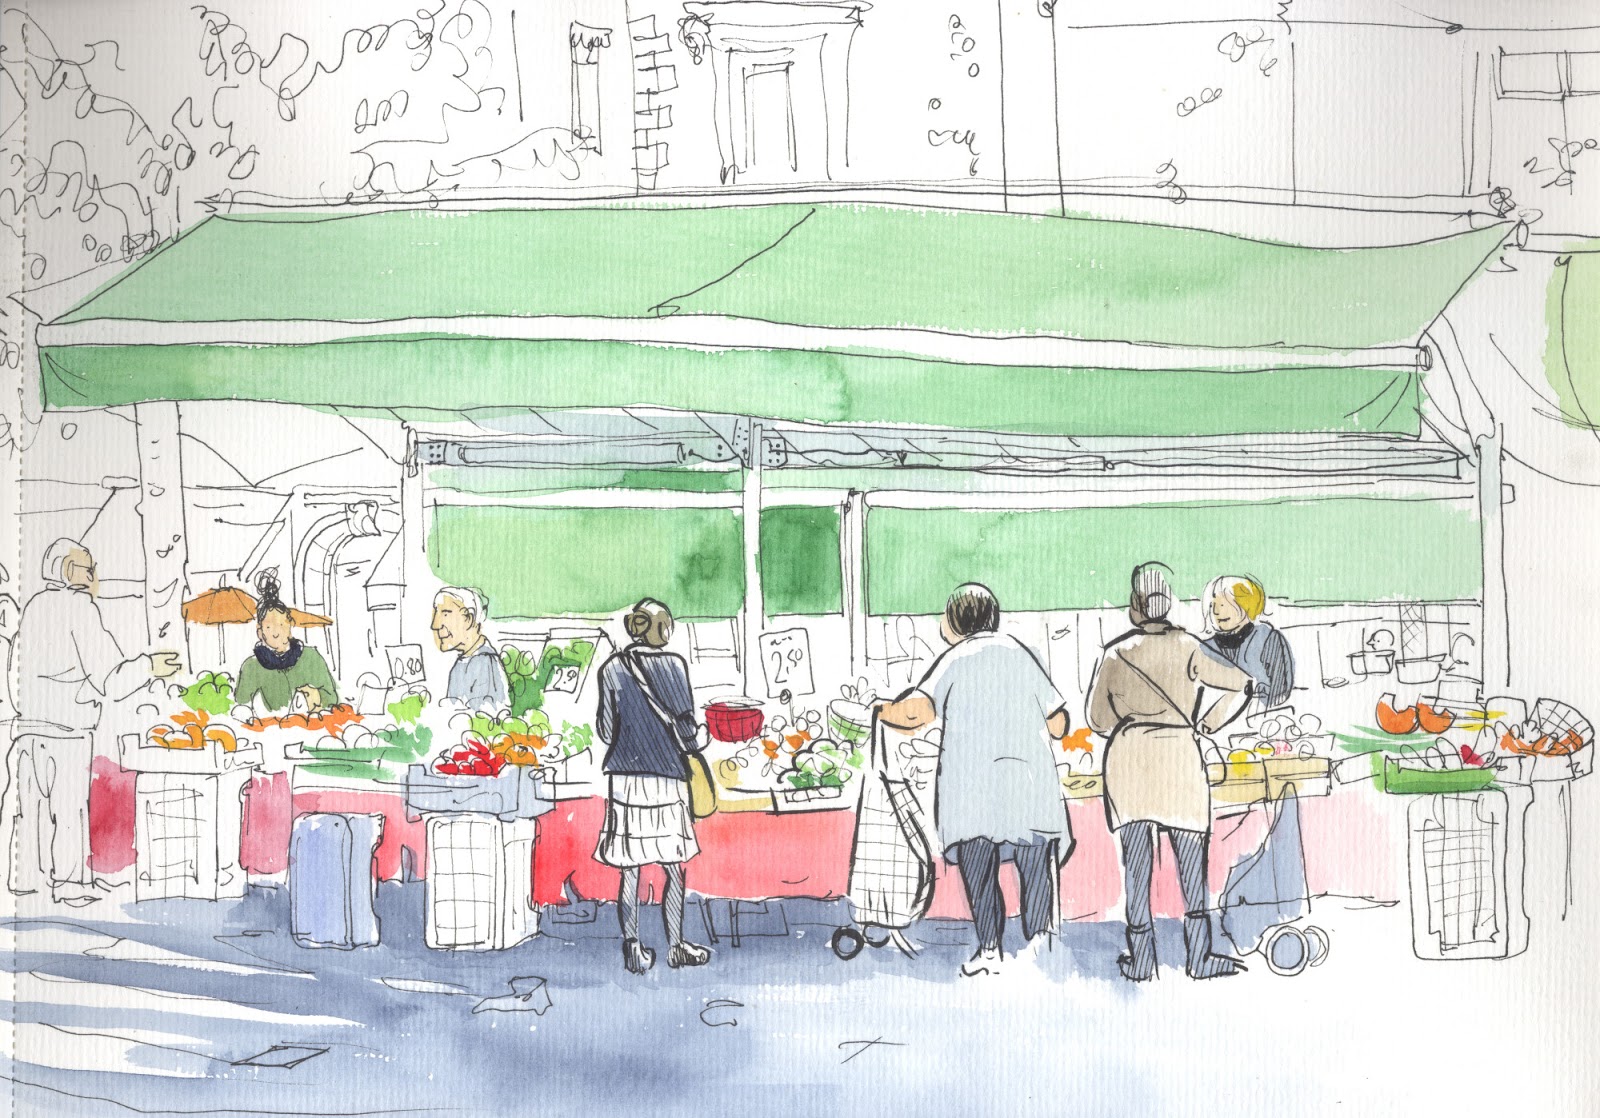 How To Draw A Market Scenery / Memory Drawing of Vegetable Market